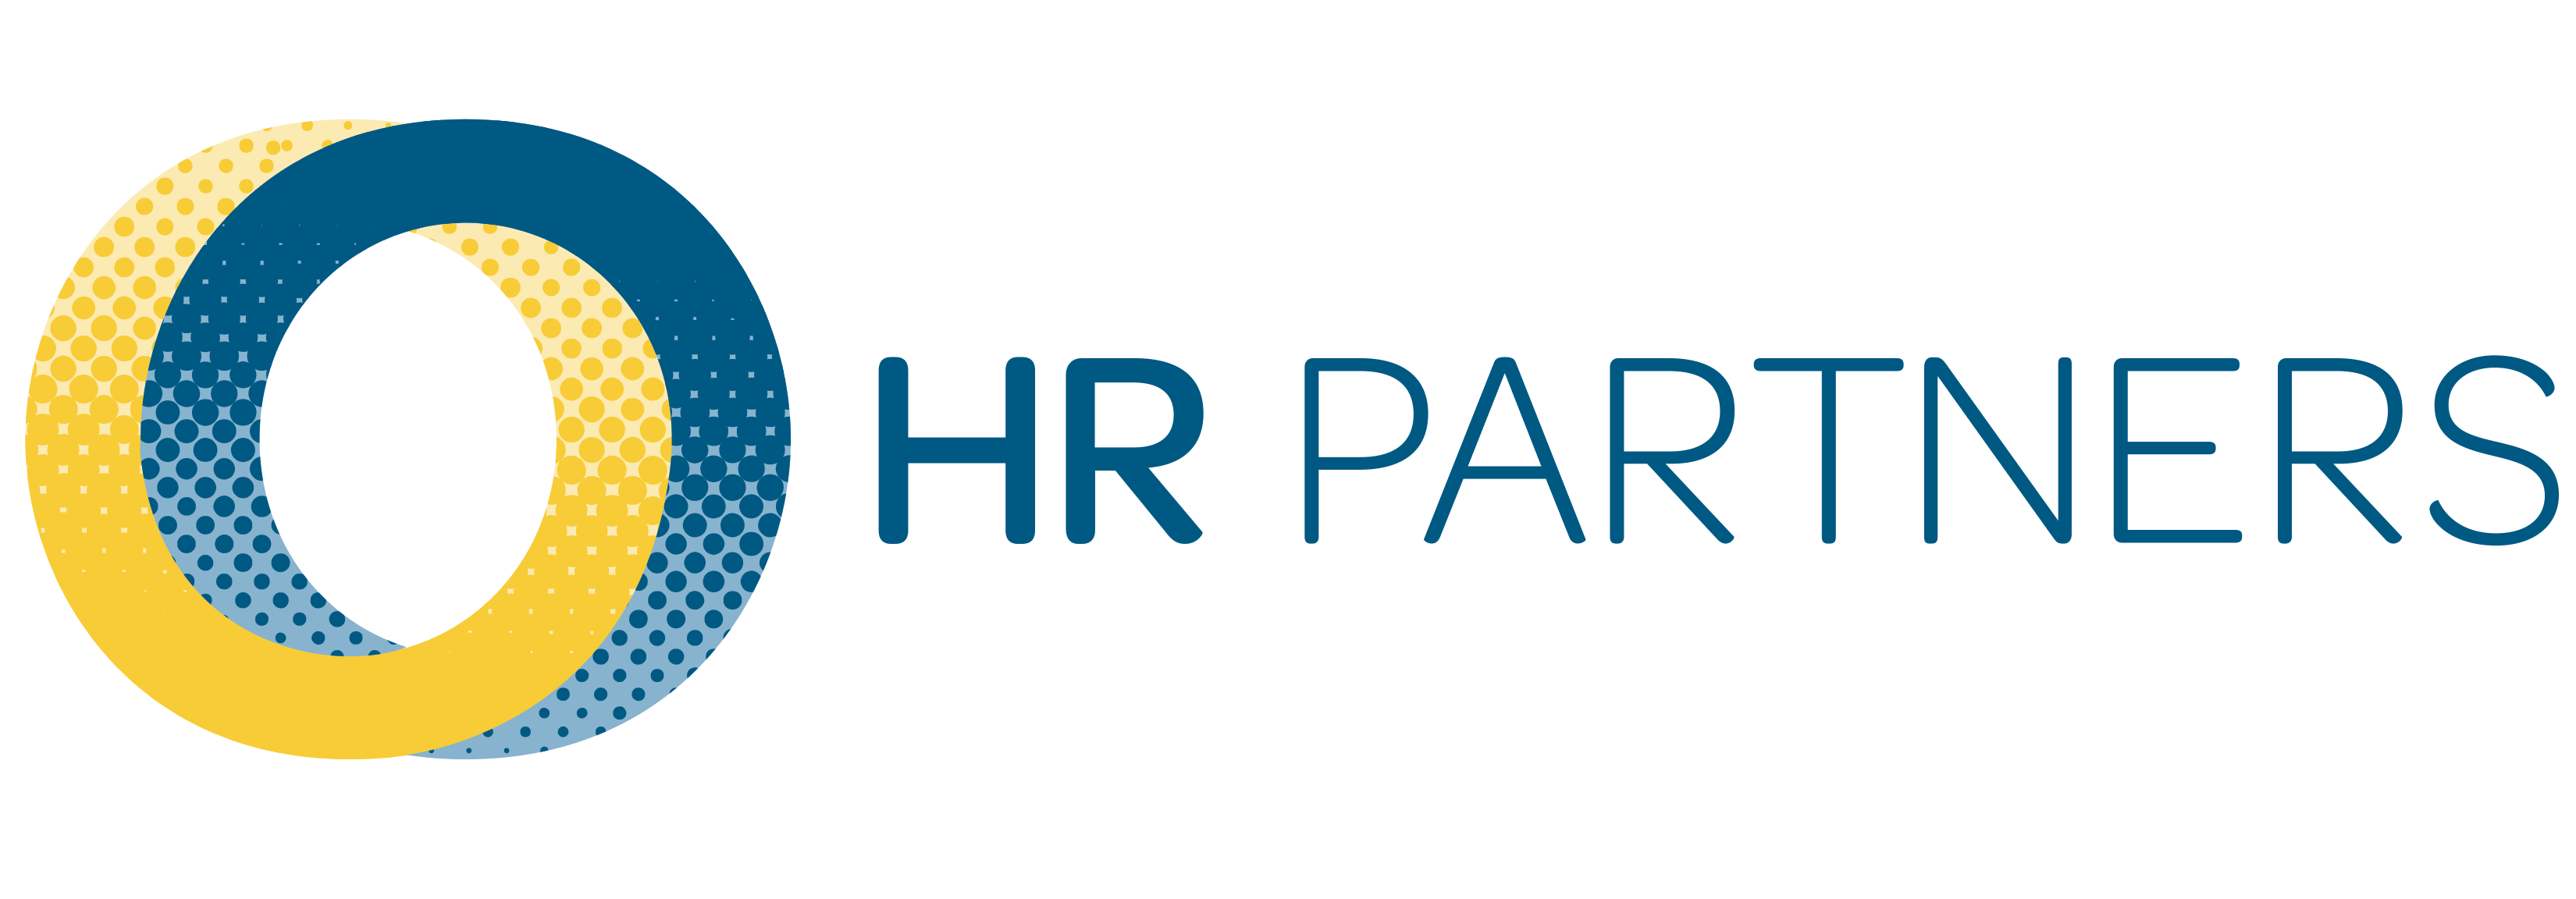 HR Partners | Human Resources Outsourcing